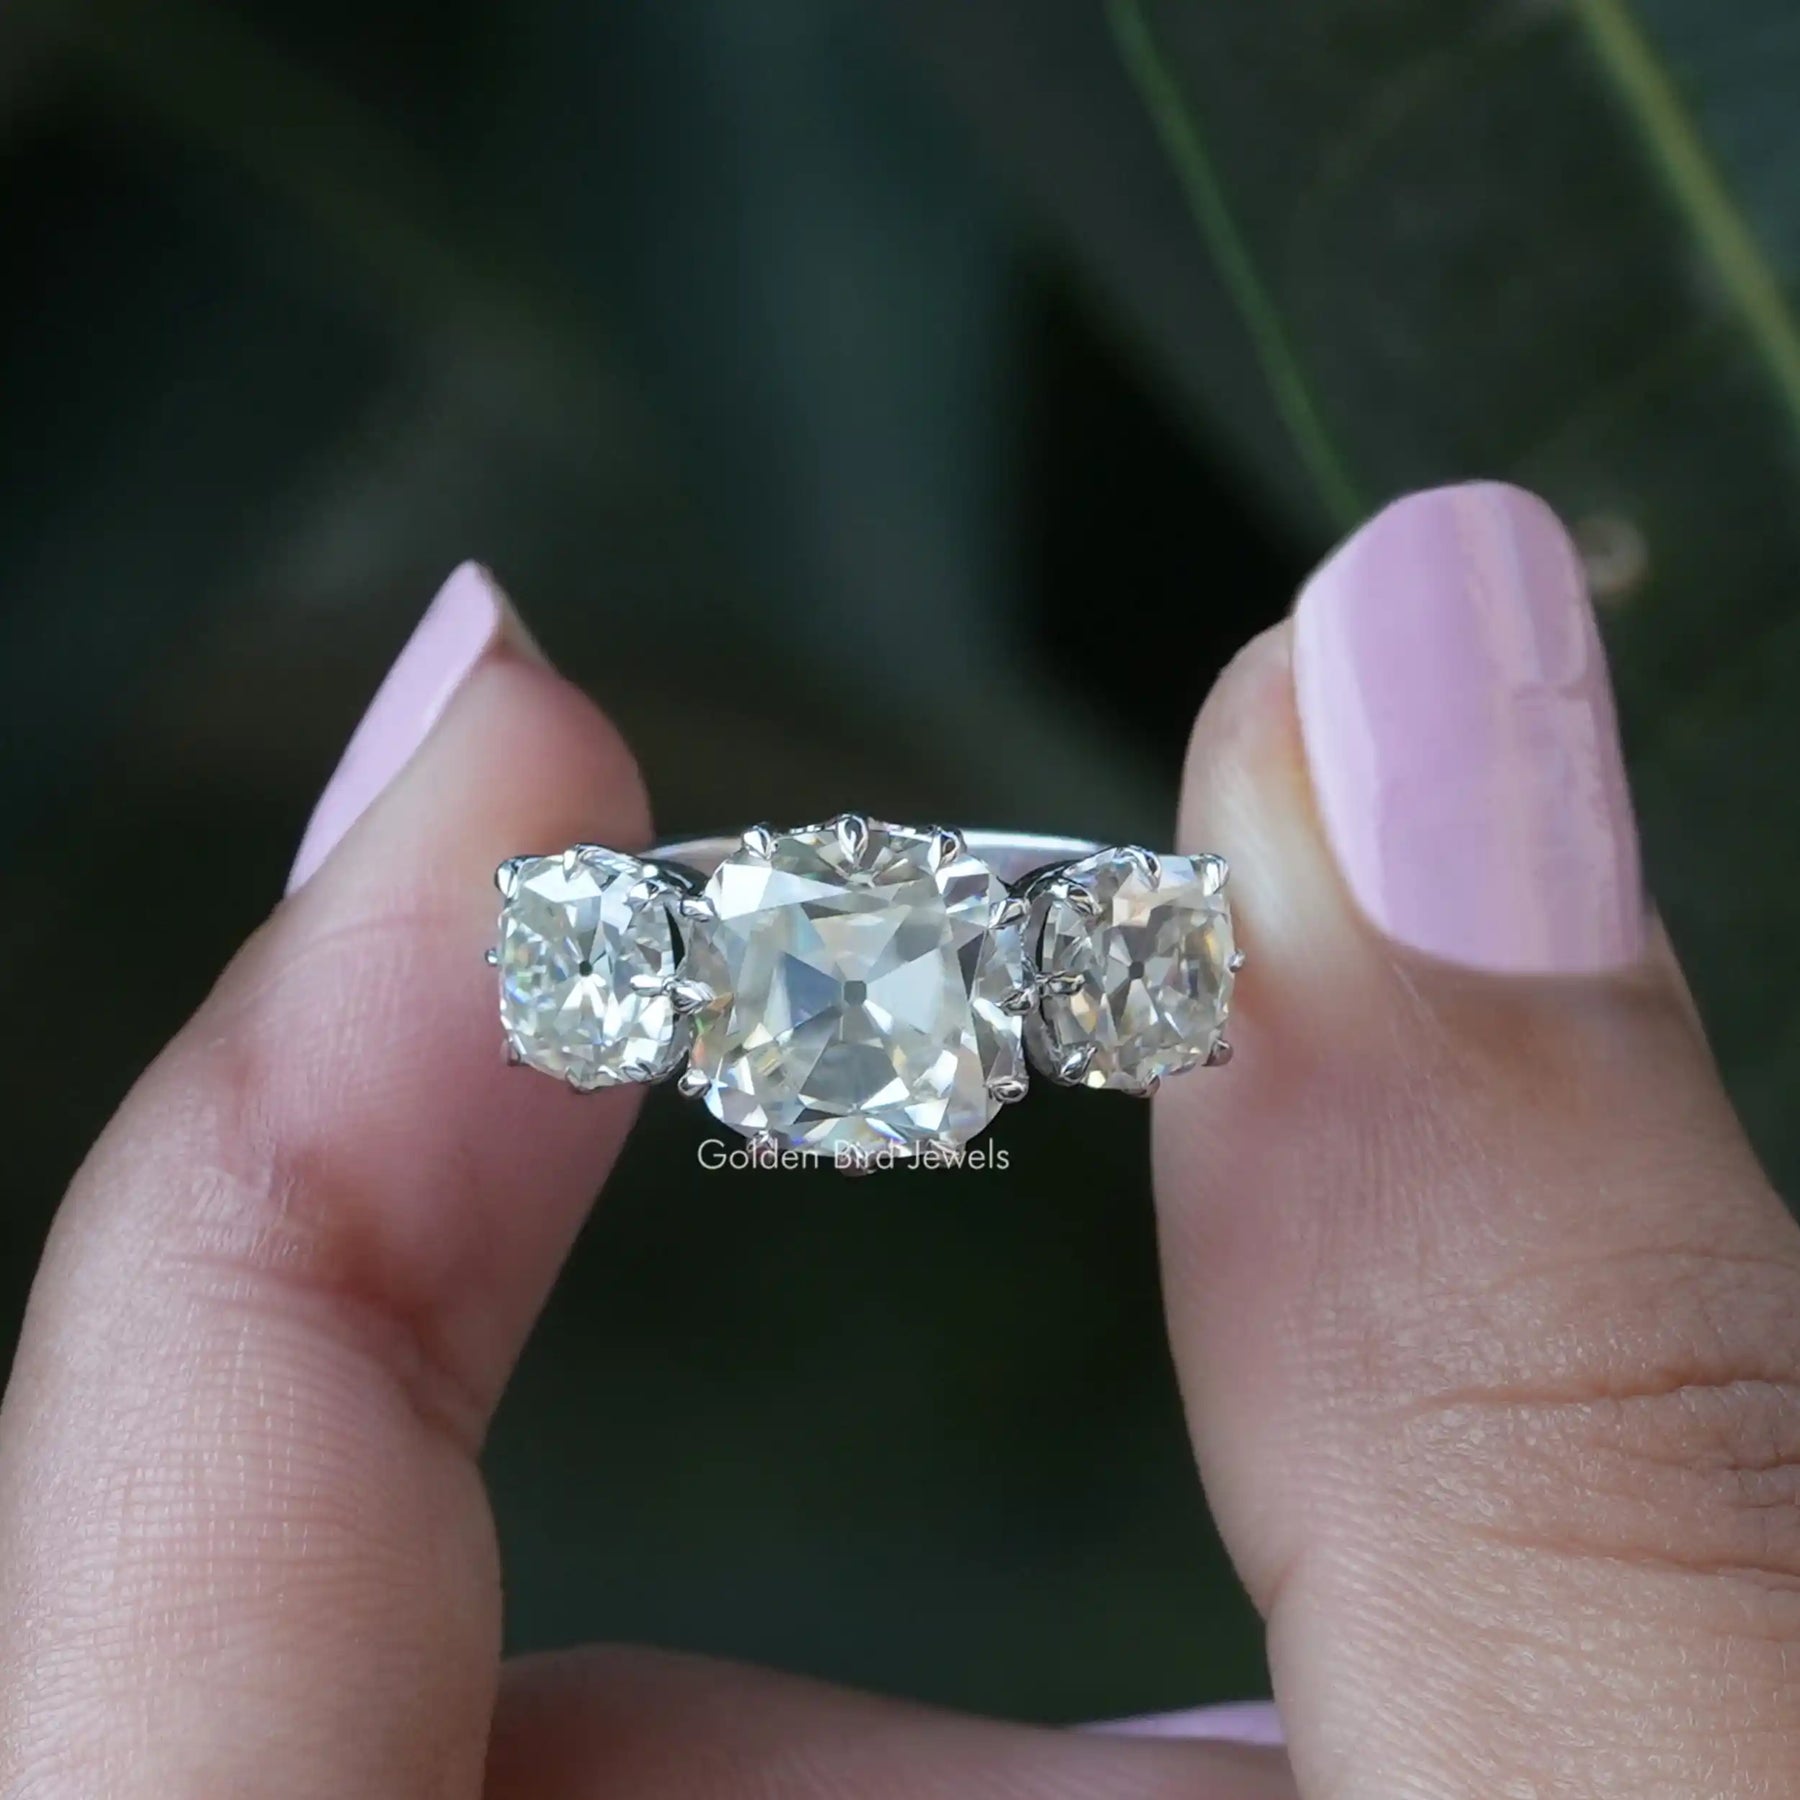 [In two finger front view of cushion cut three stone moissanite ring]-[Golden Bird Jewels]